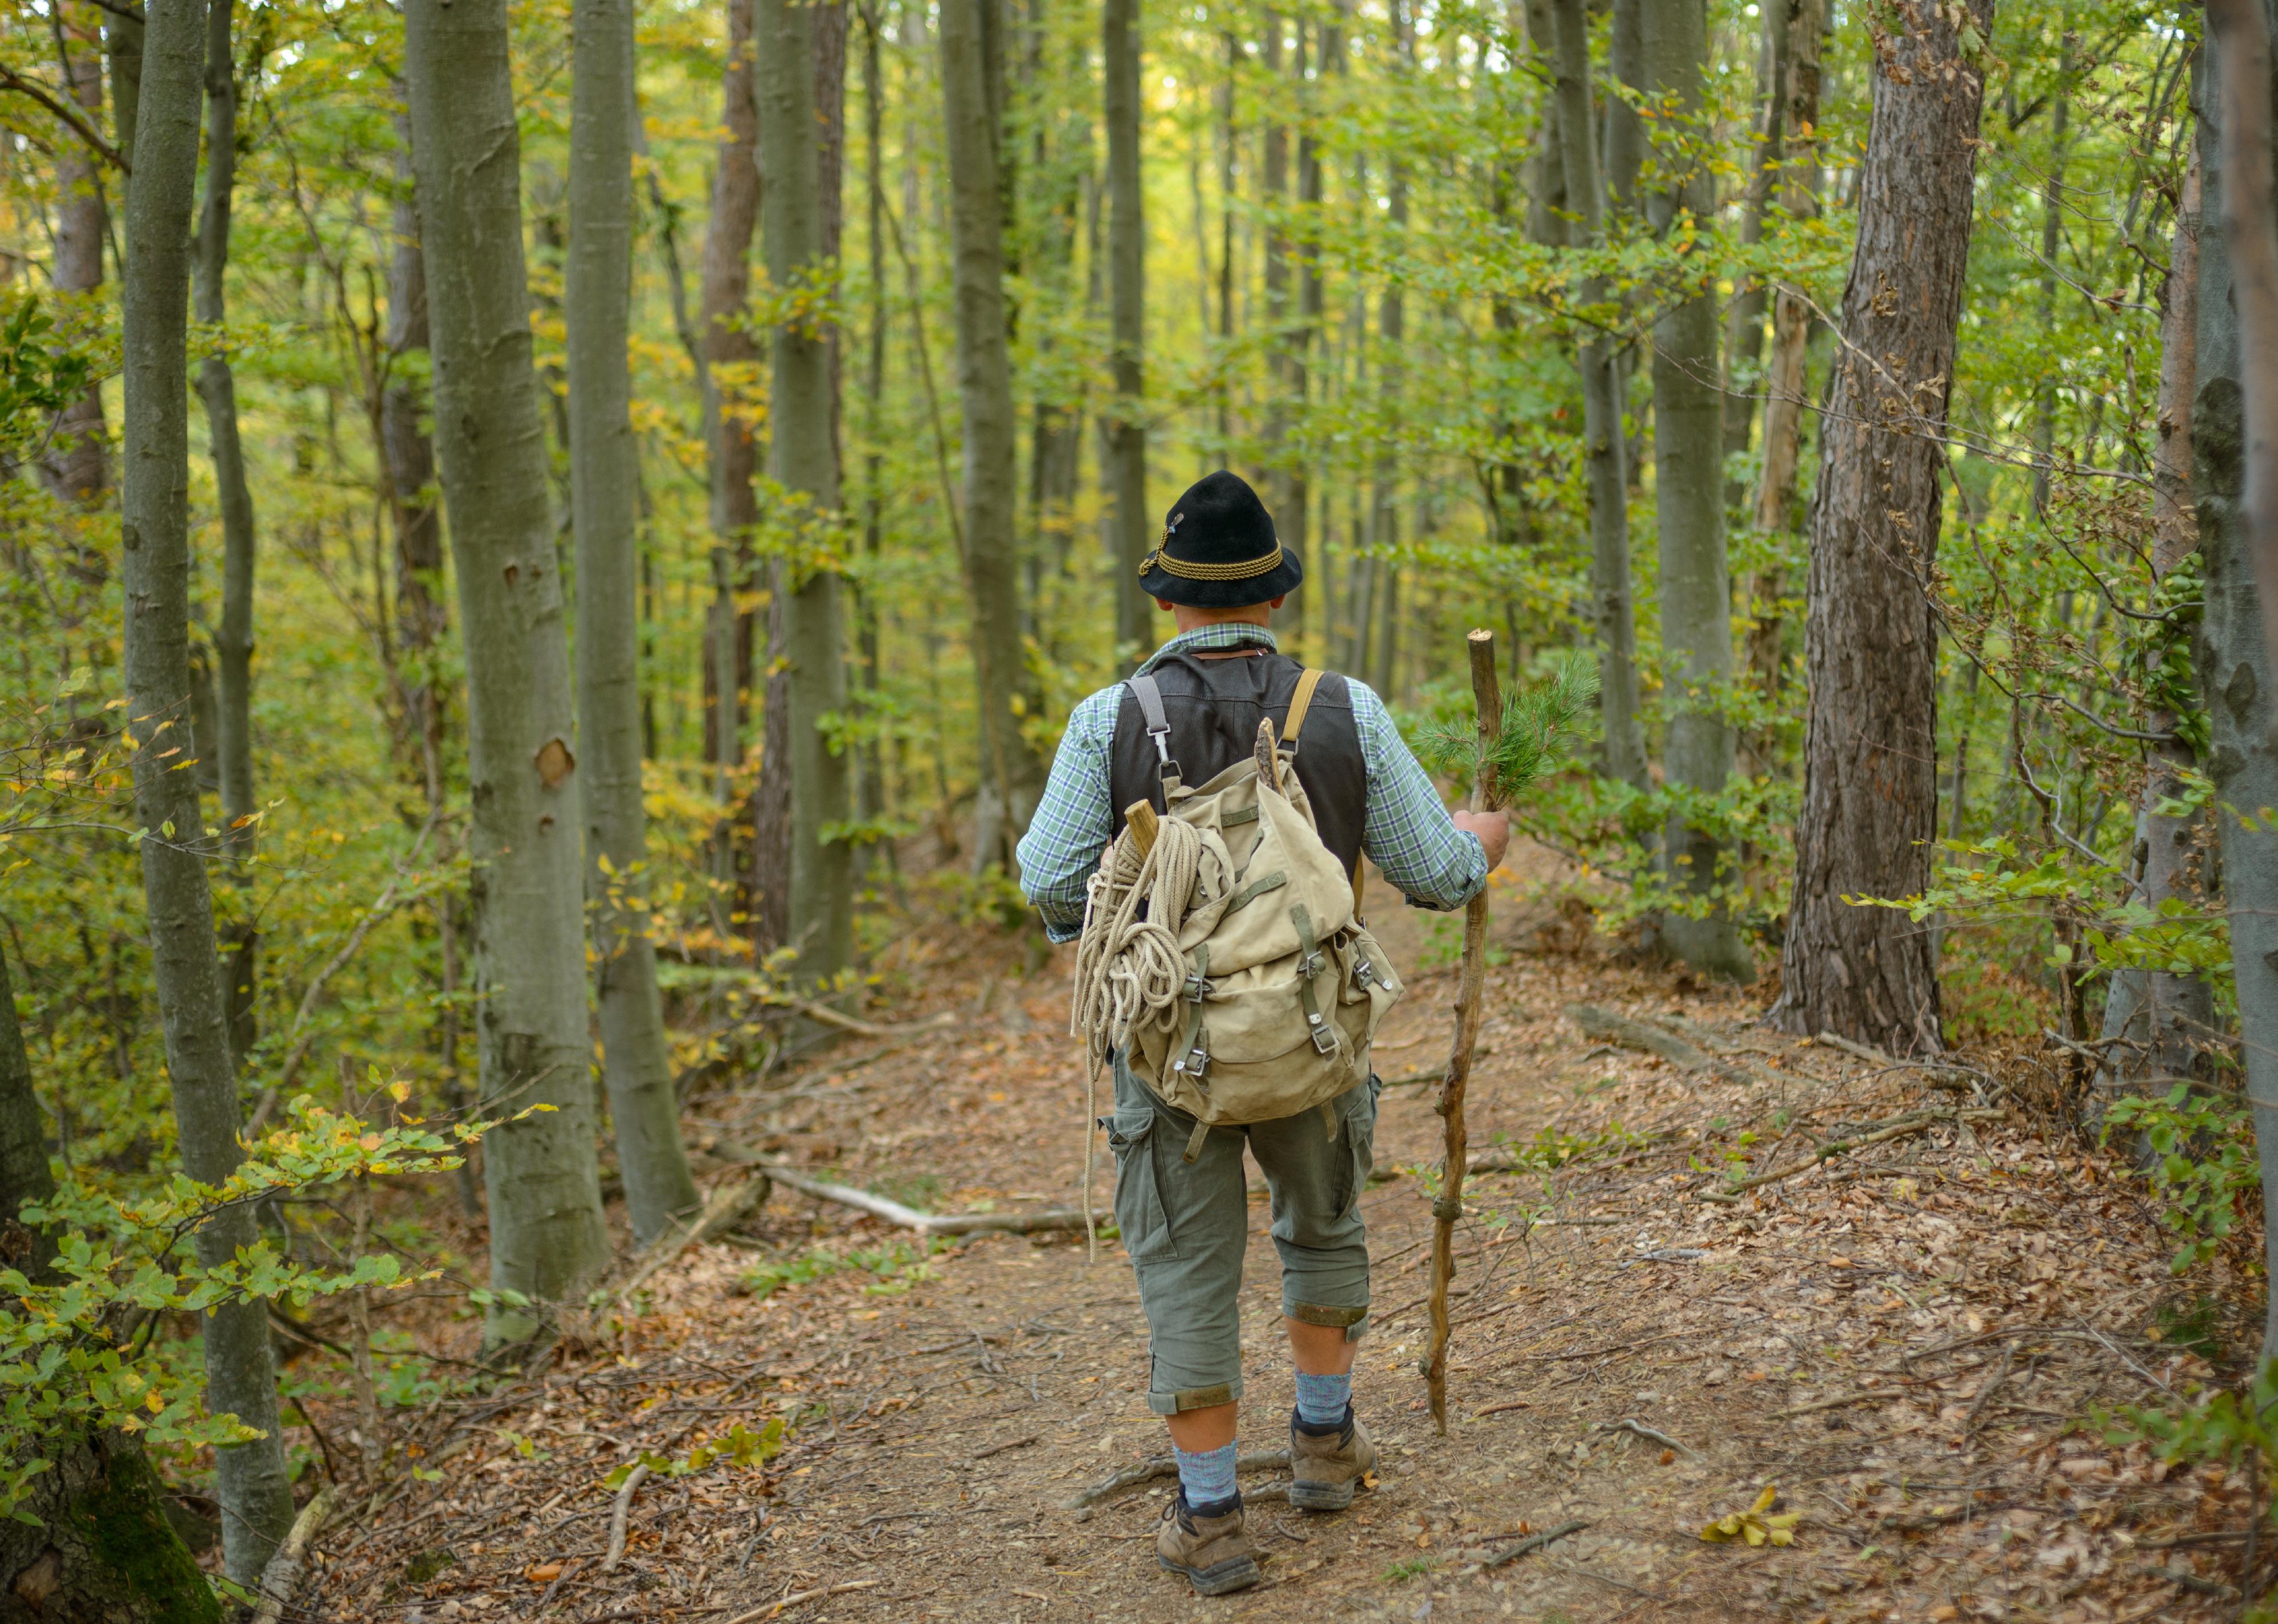 An old man in a hat with a backpack on a trail.